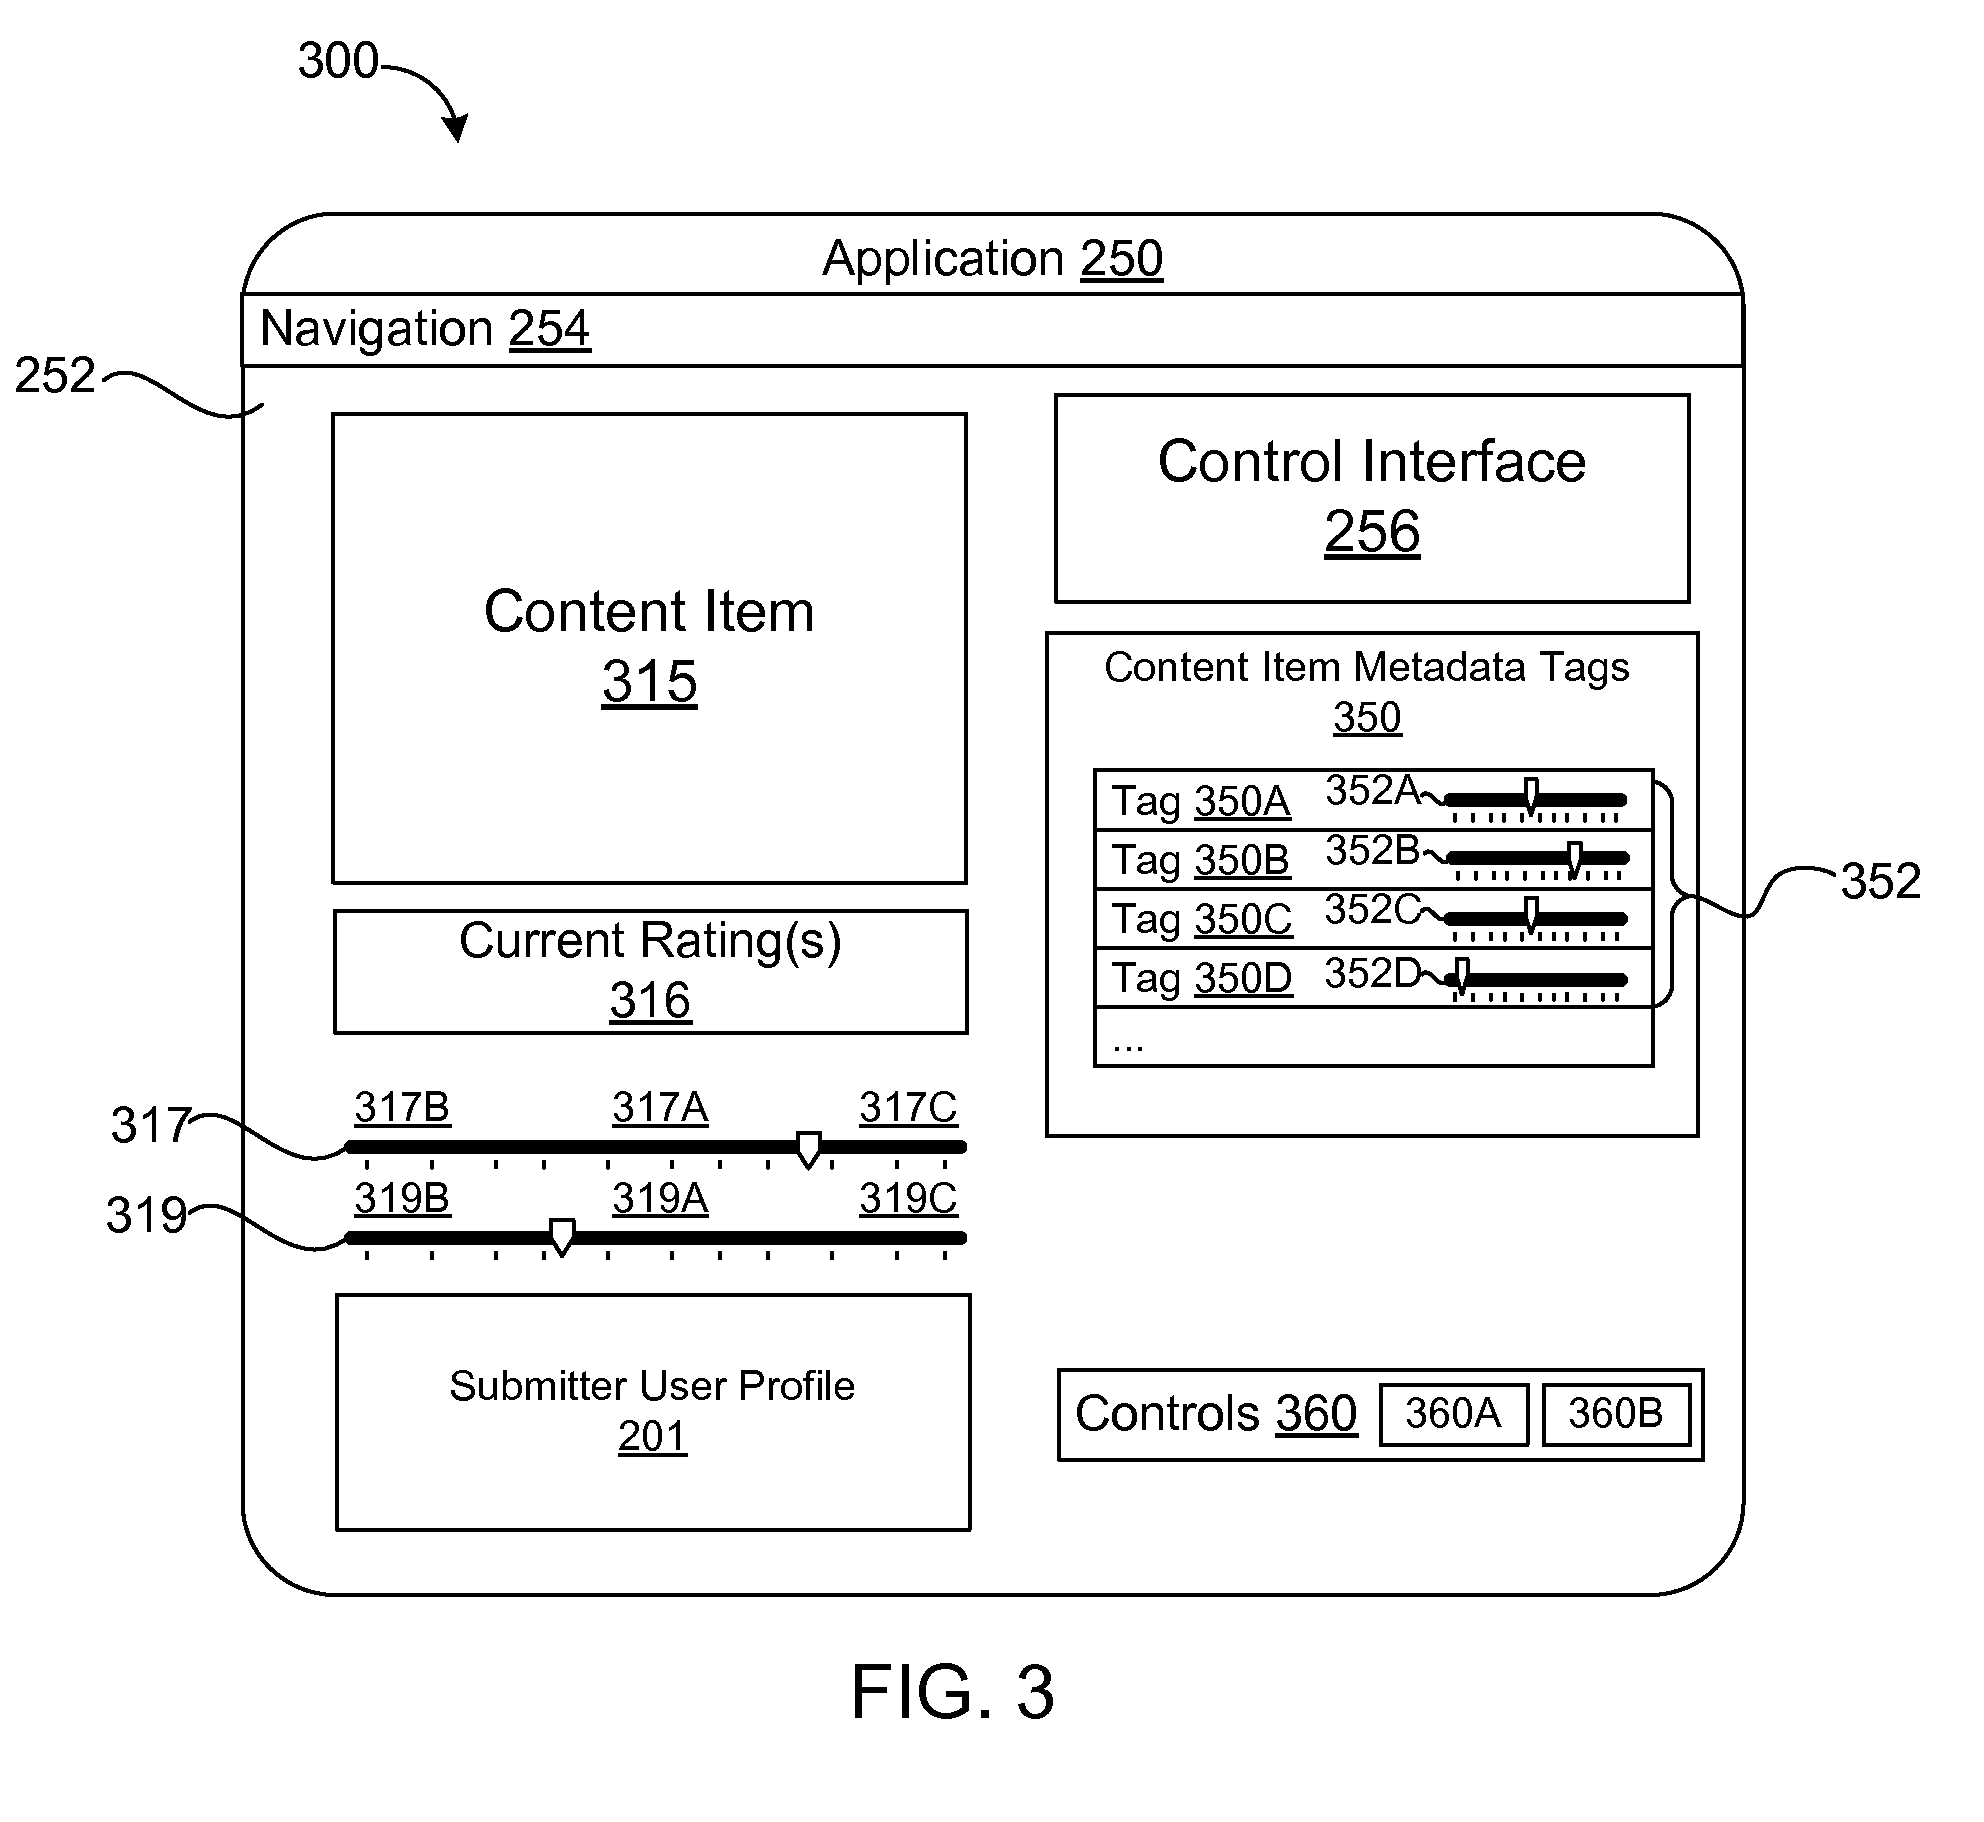 Systems and methods for selecting and presenting representative content of a user